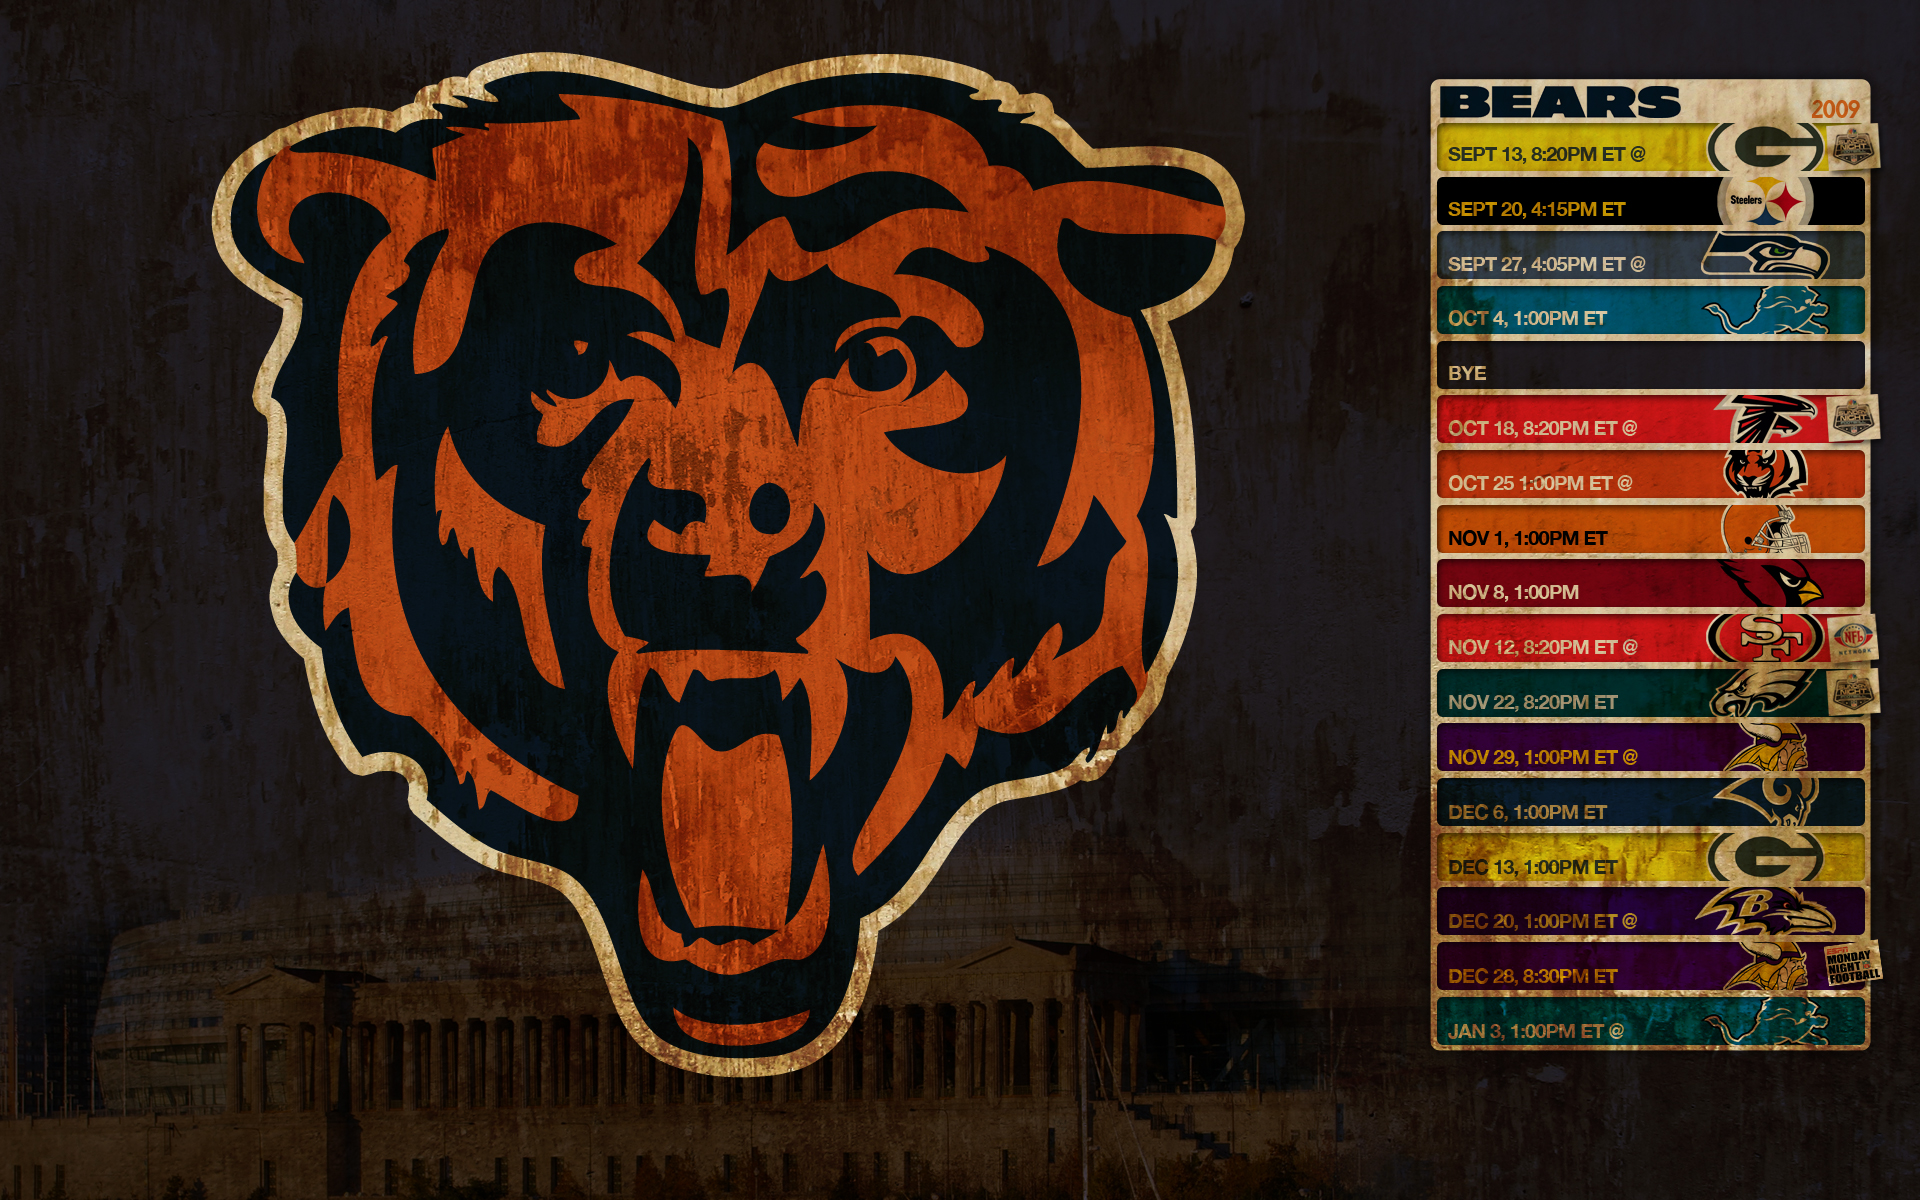 Related Wallpaper Chicago Bears Schedule